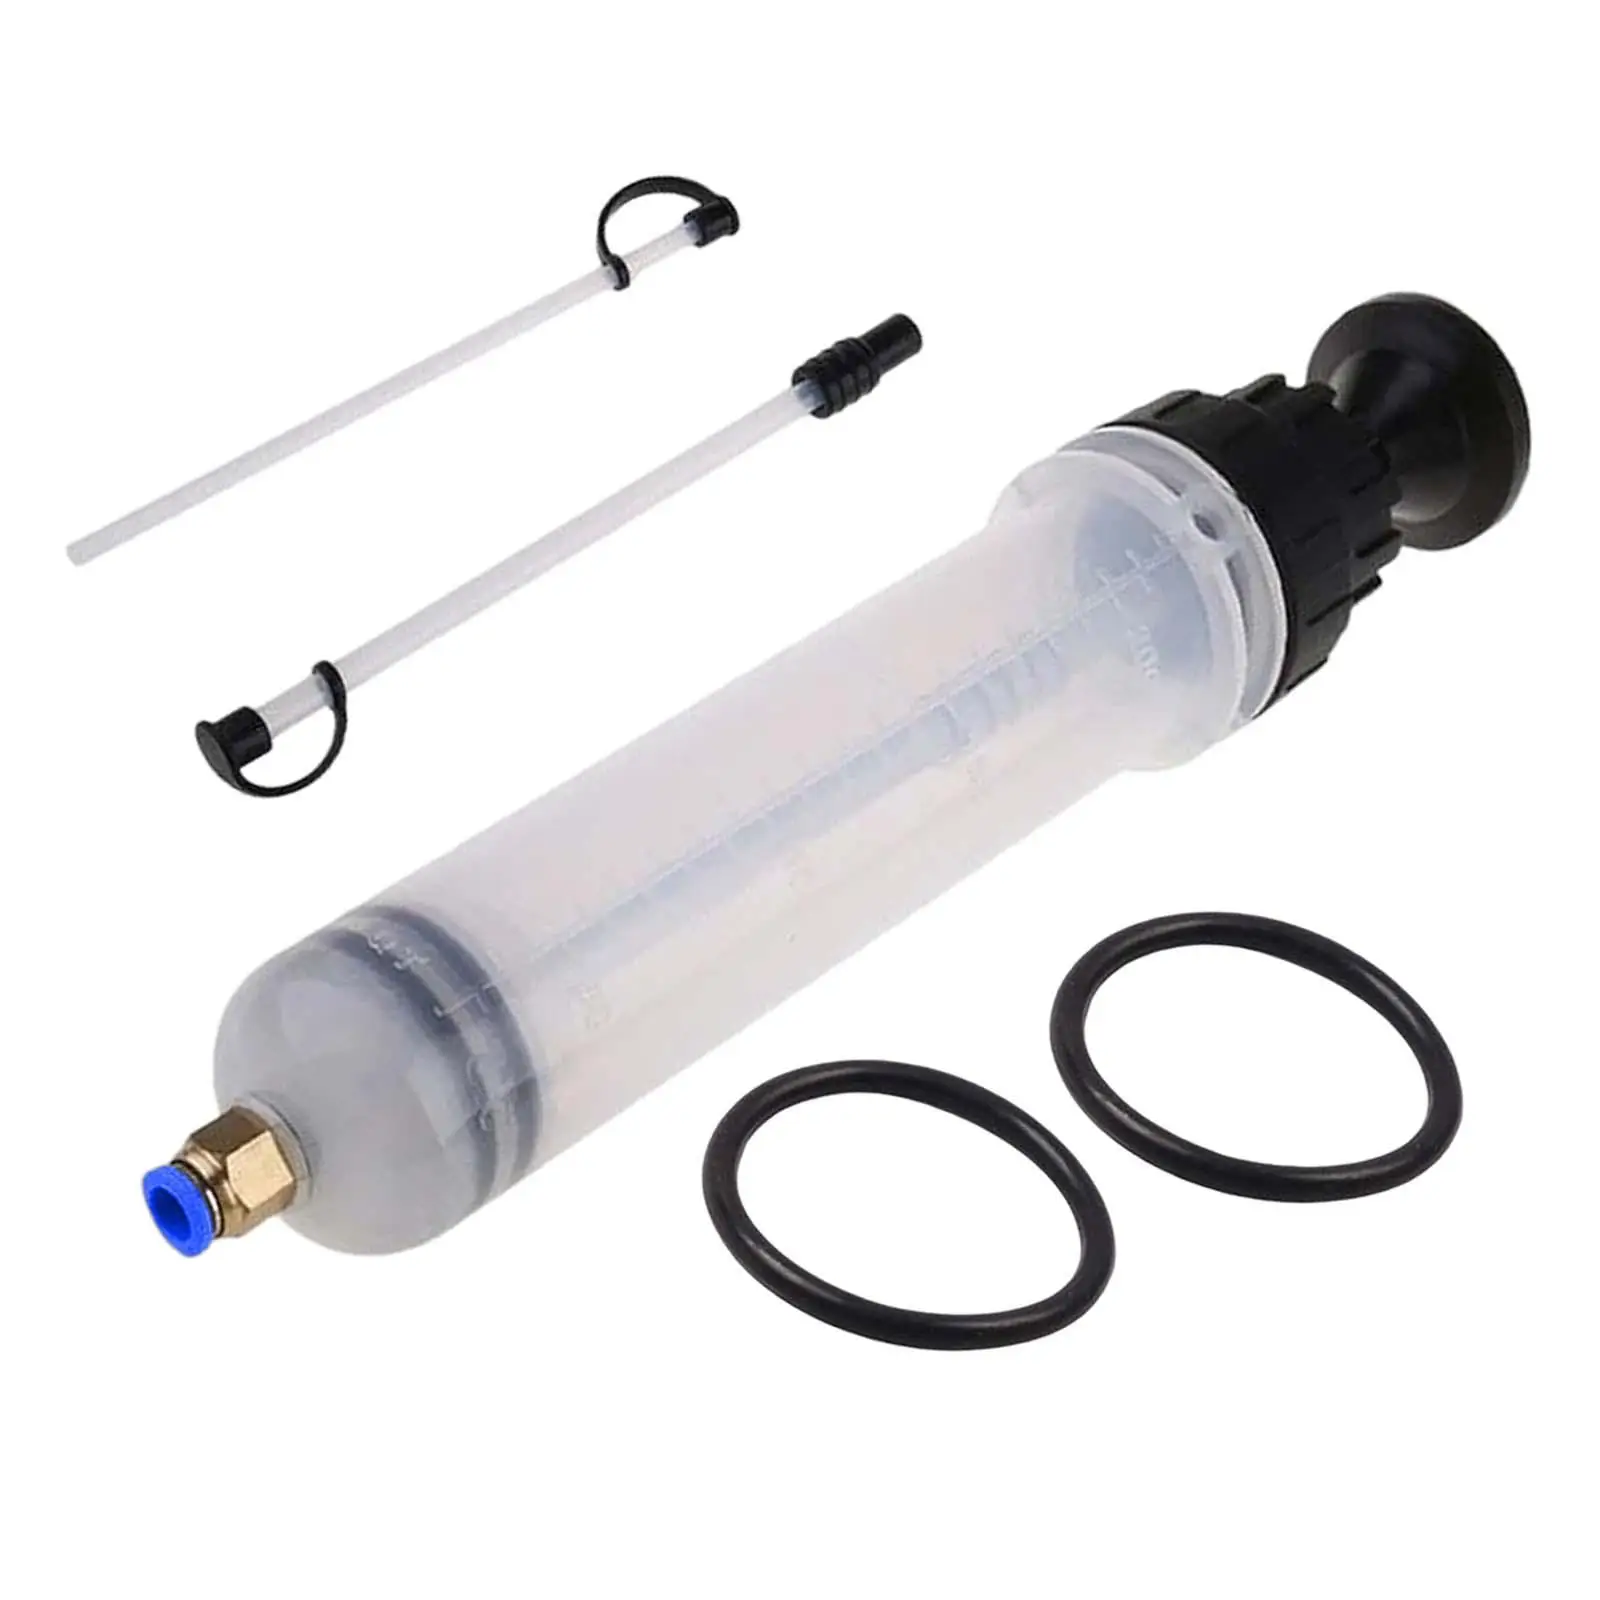 

Universal Brake Fluid Extractor Filling Transfer Liquid Pump Replacement Tool 500cc for Car RV Motorcycle Vehicles Boats